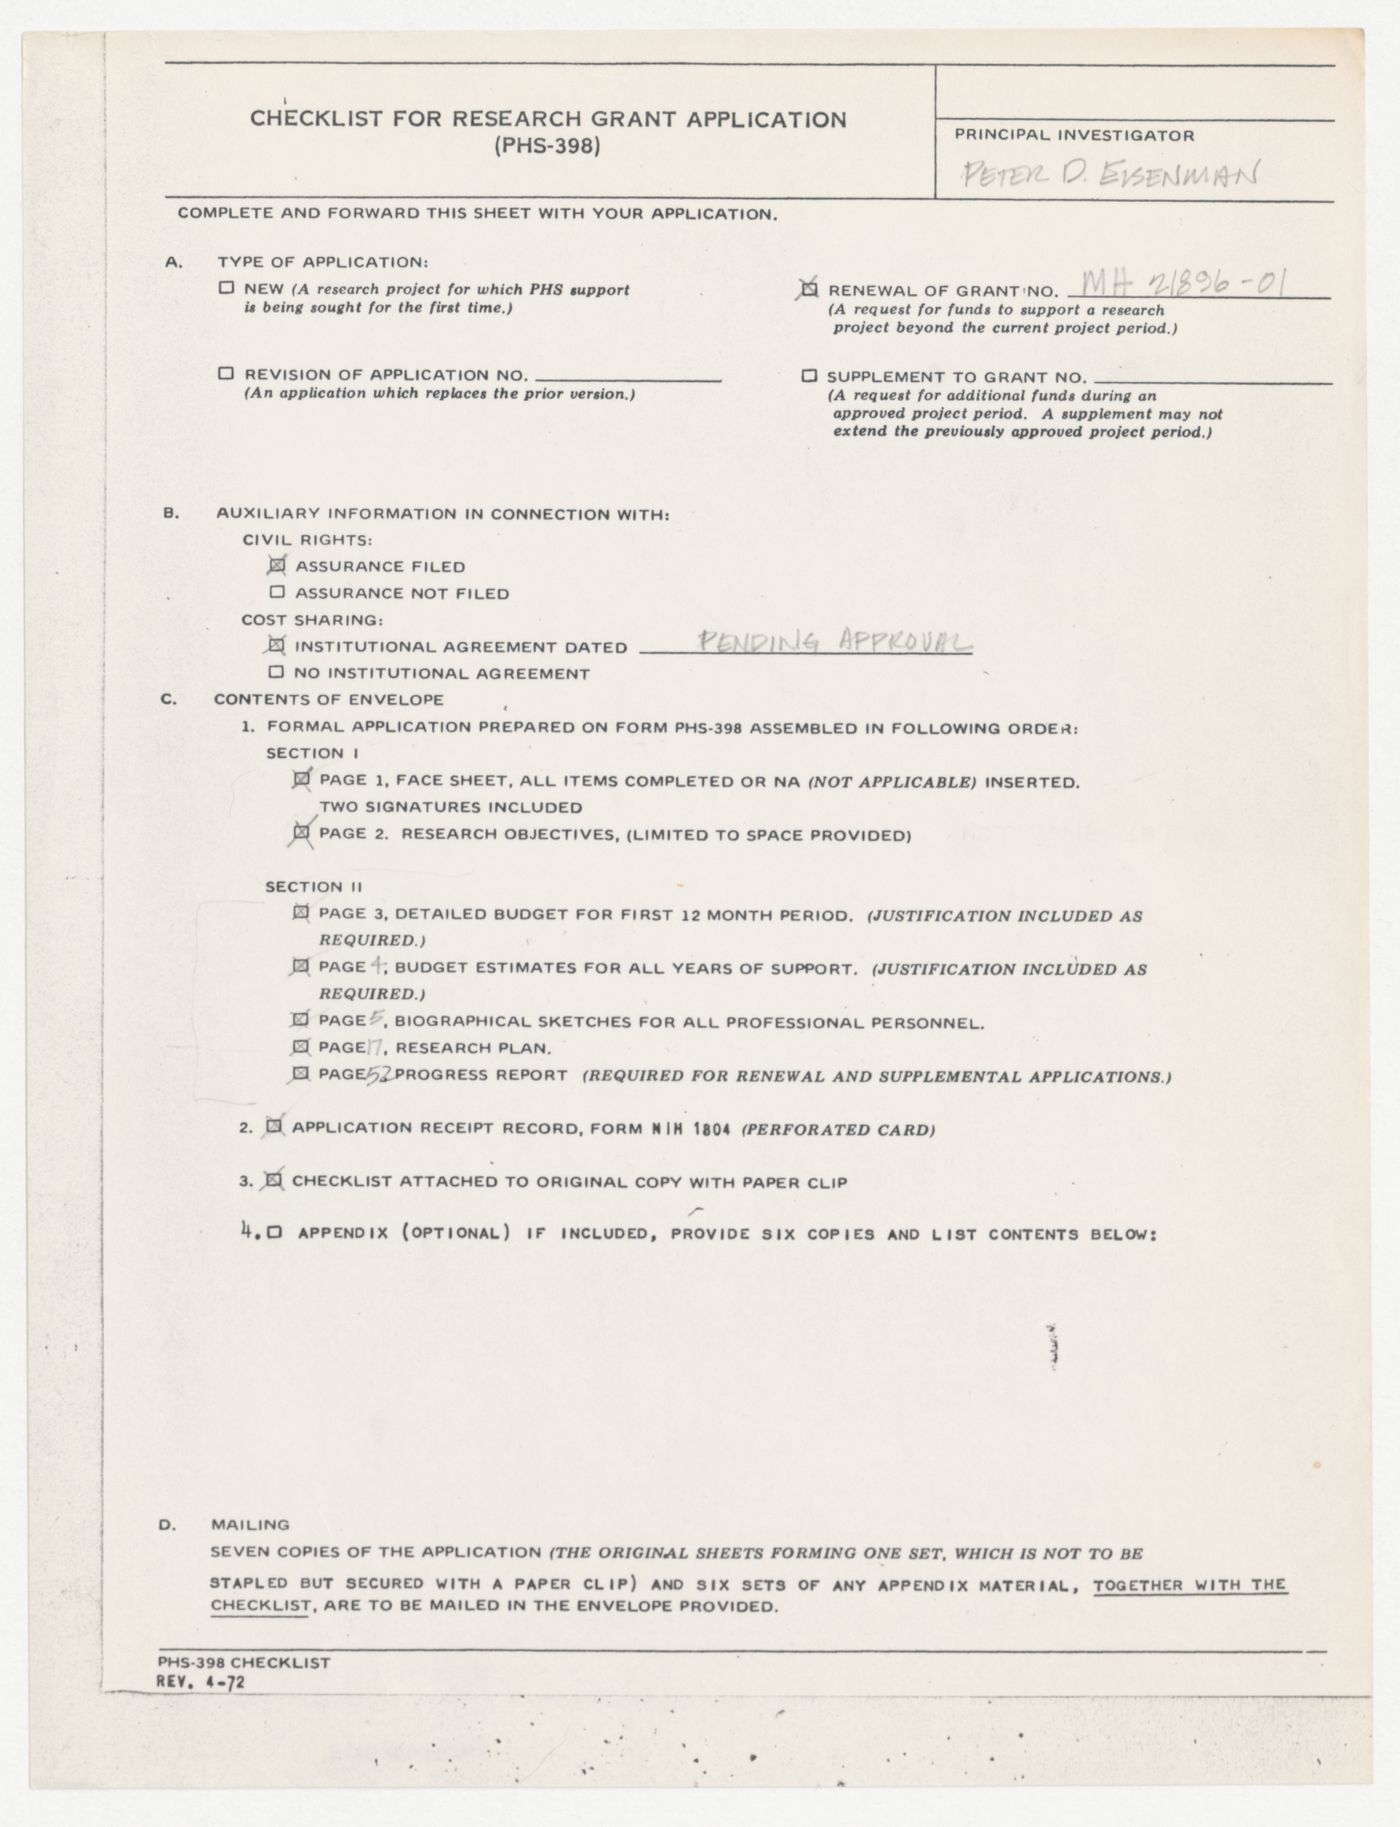 Checklist for application for renewal of research grant from the National Institute of Mental Health (NIMH) / Department of Health, Education, and Welfare completed by Peter D. Eisenman